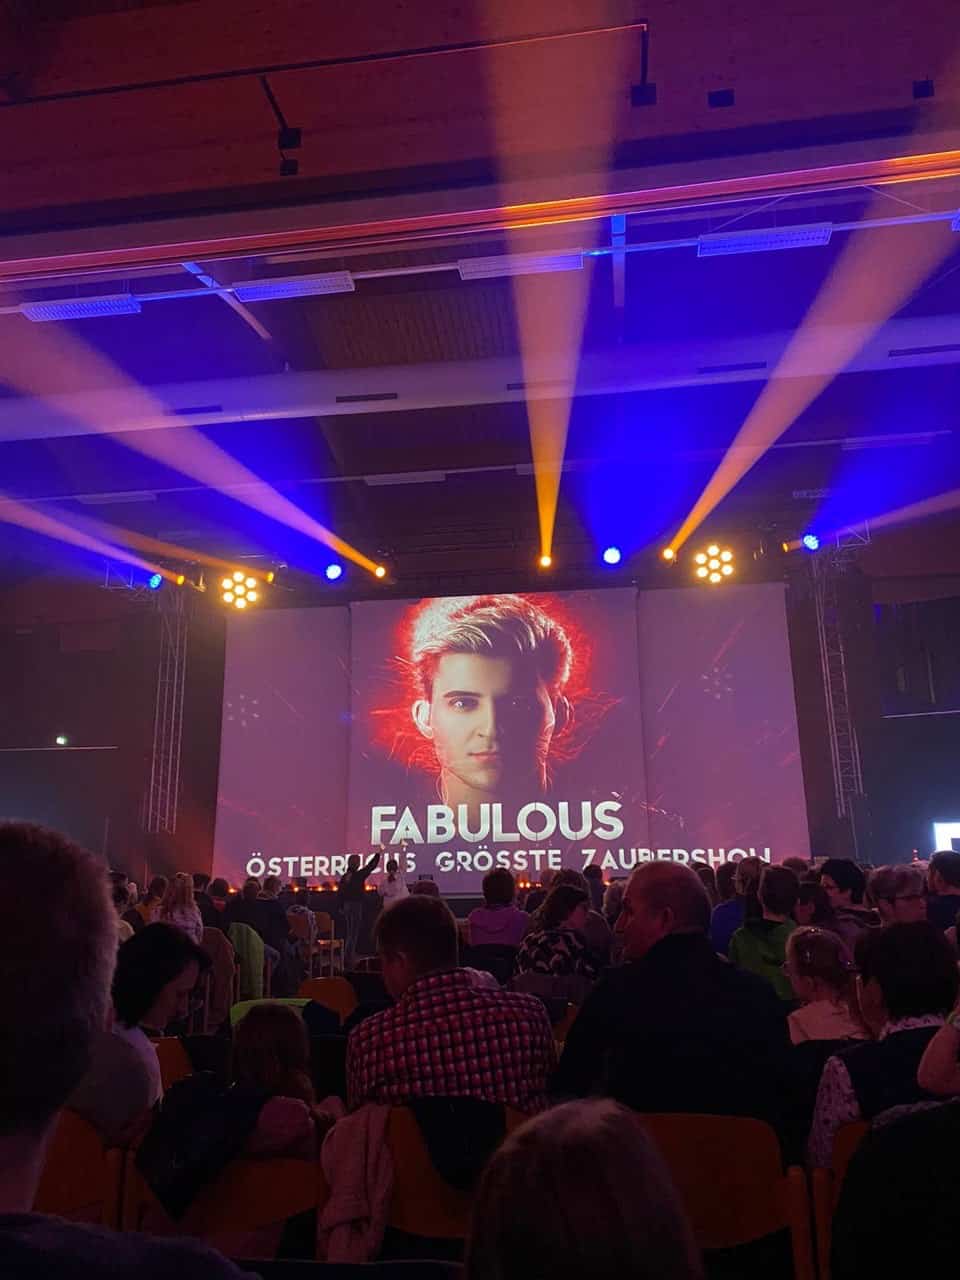 ATTENDING THE FABULOUS SHOW